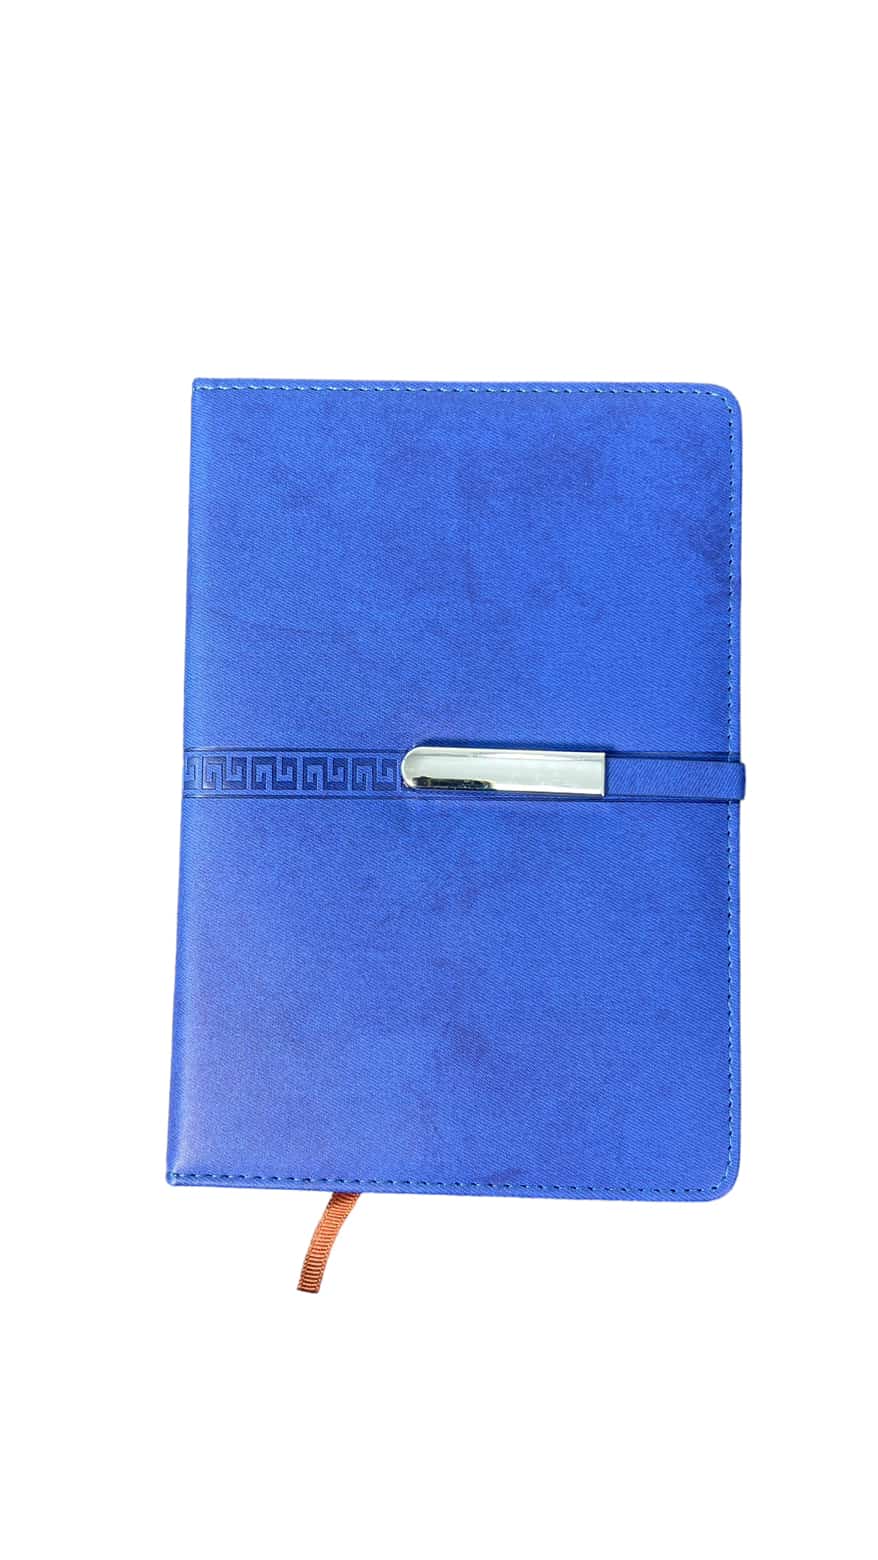 HARD COVER FABRIC JOURNAL